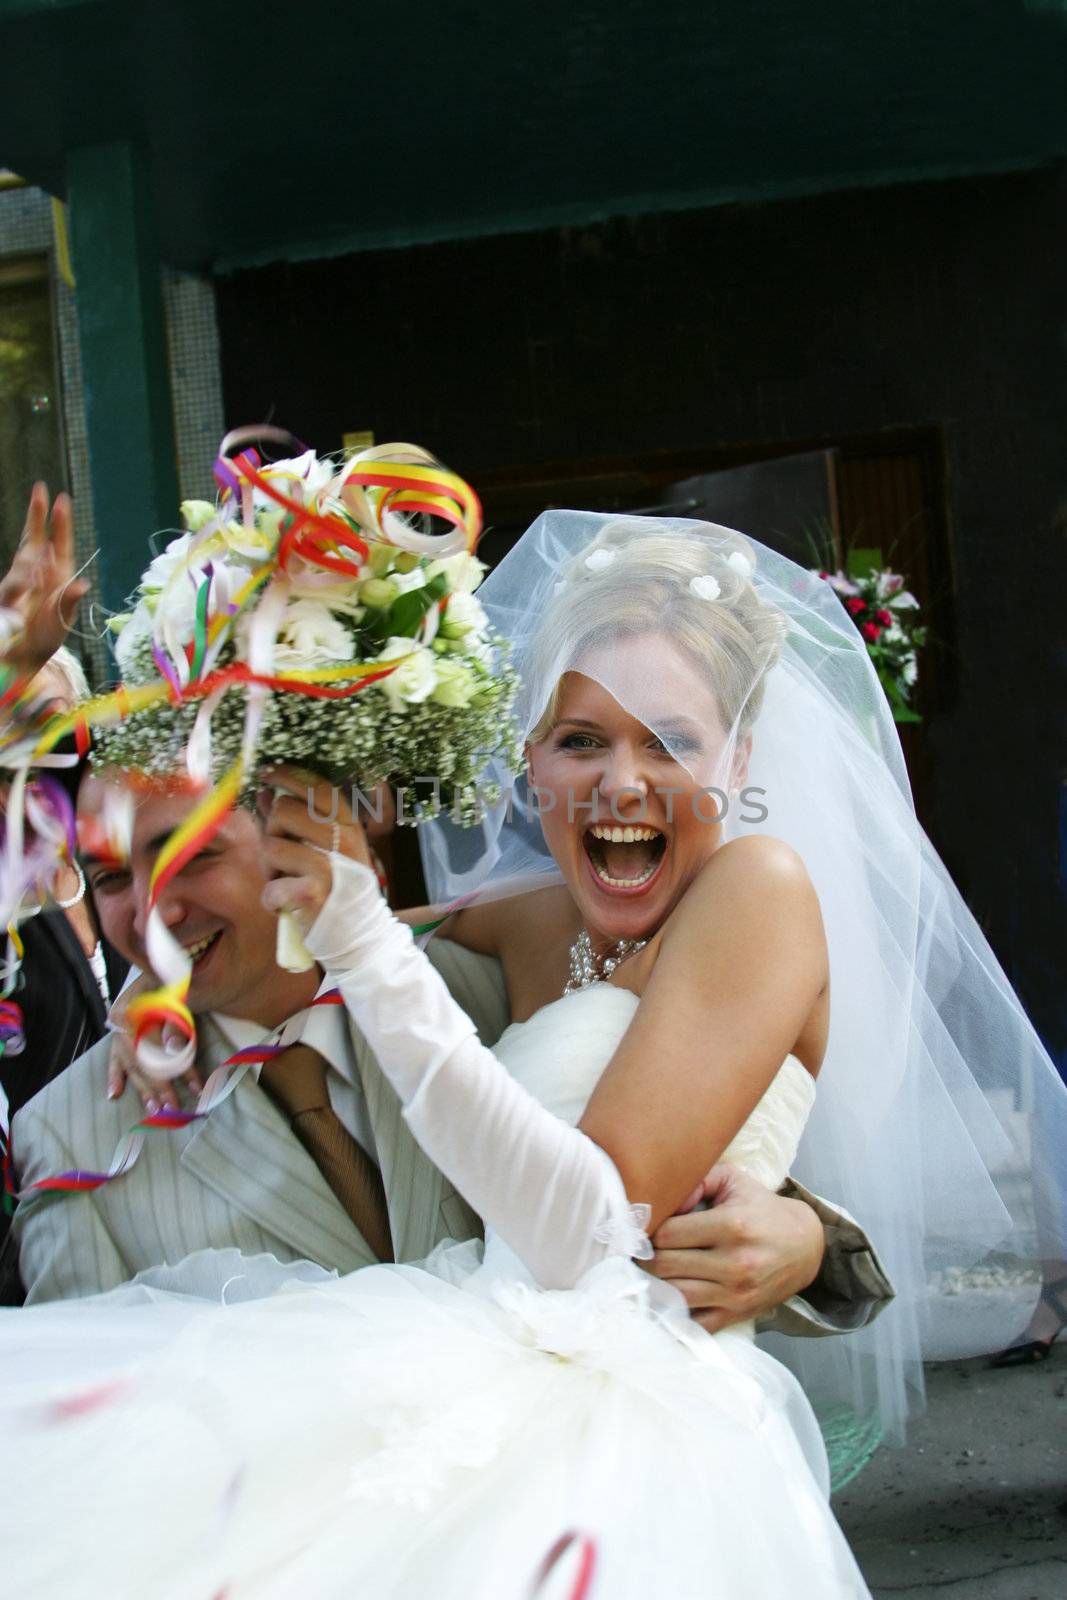 Happy groom and the bride in day of wedding